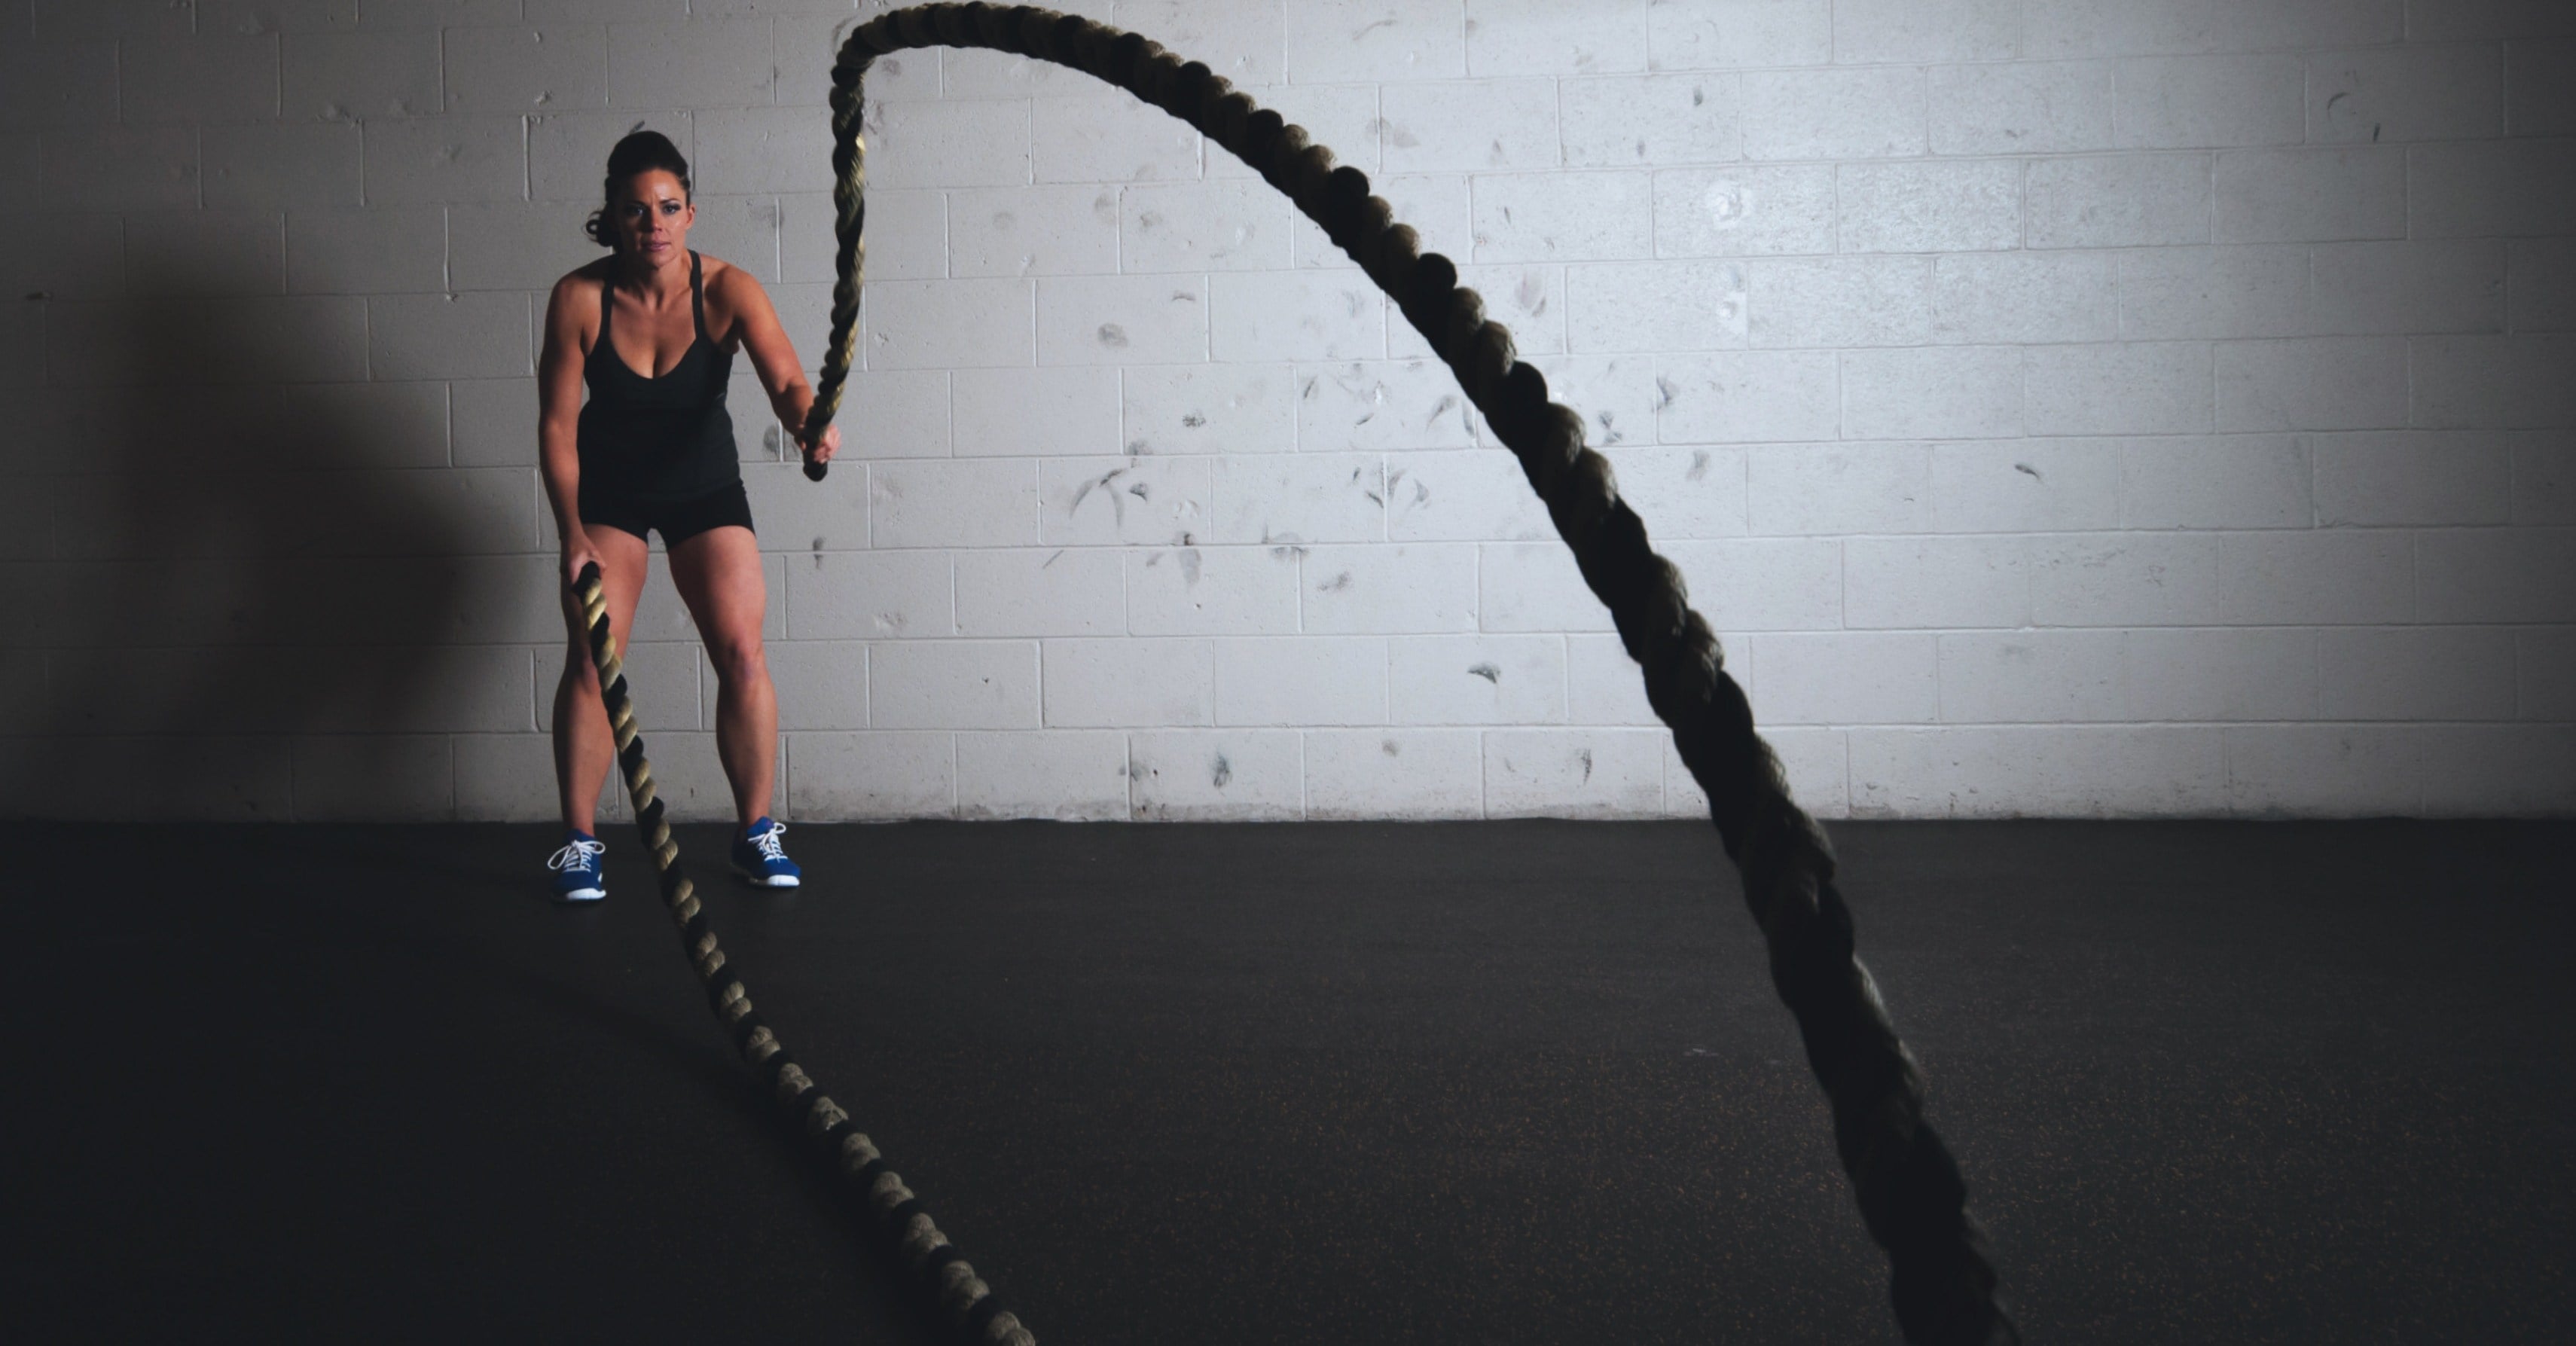 Battle Rope Workout For Arm and Abs